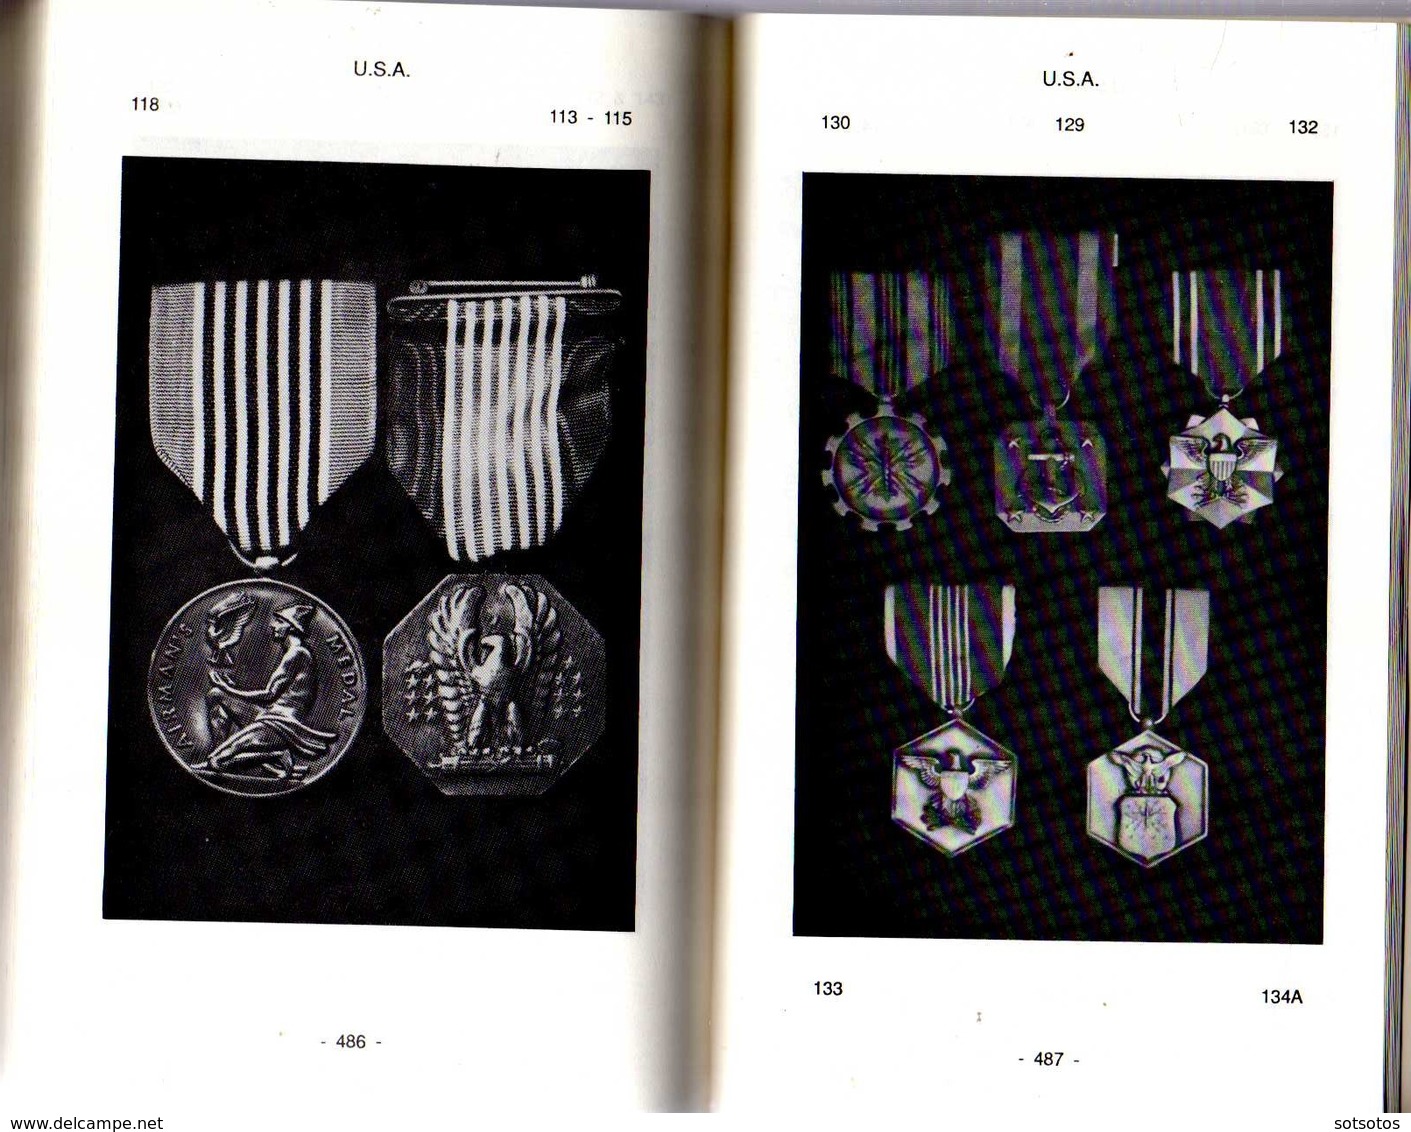 Vernon’s Collectors' Guide to Orders, Medals & Decorations (with values) by Sydney B. Vernon - 2nd (revised) edition1990